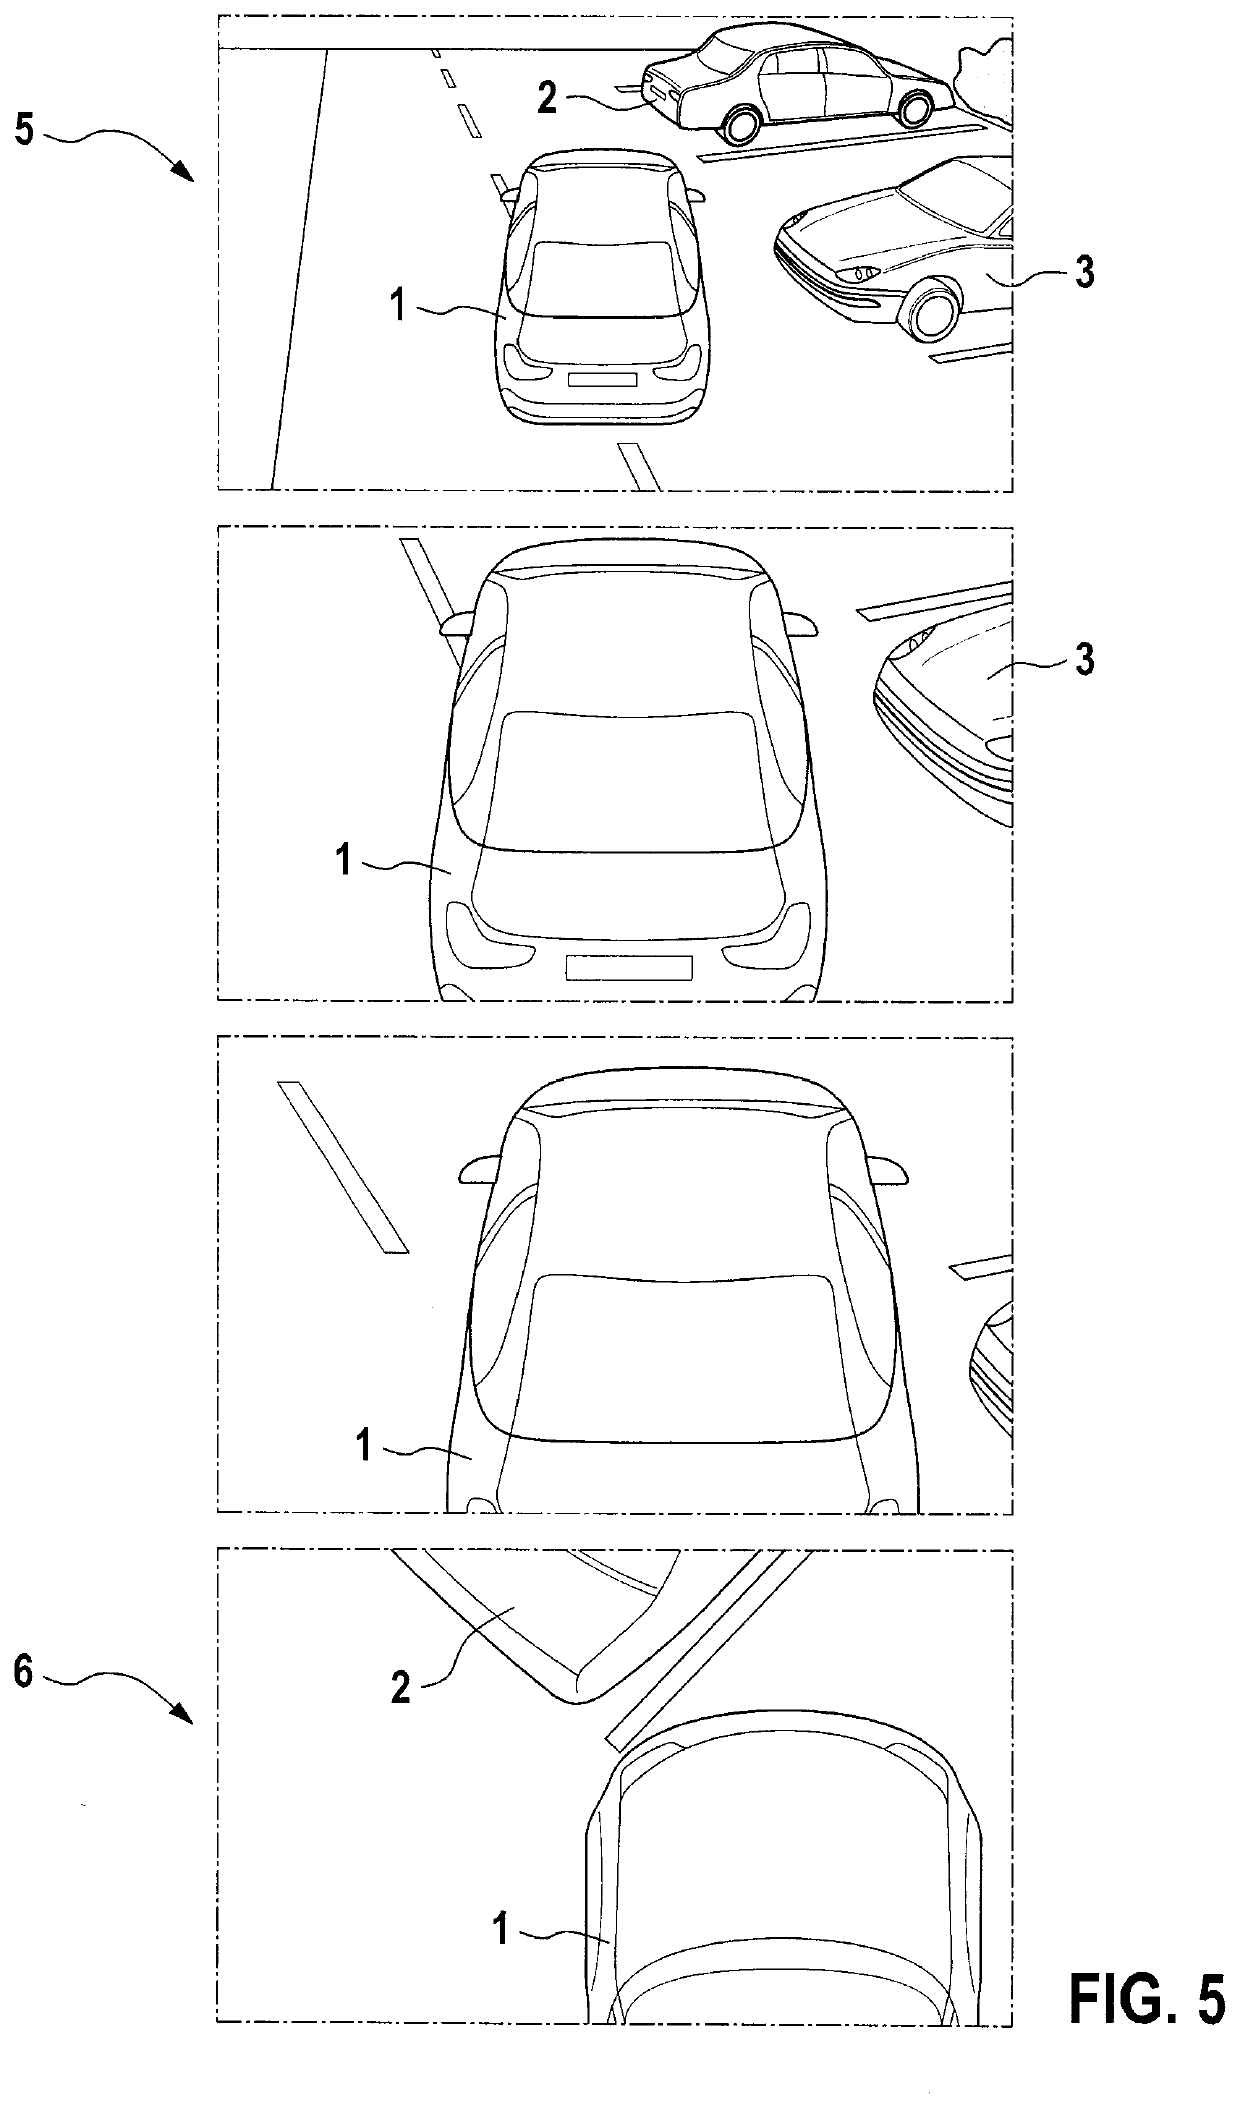 Method for representing the surroundings of a vehicle